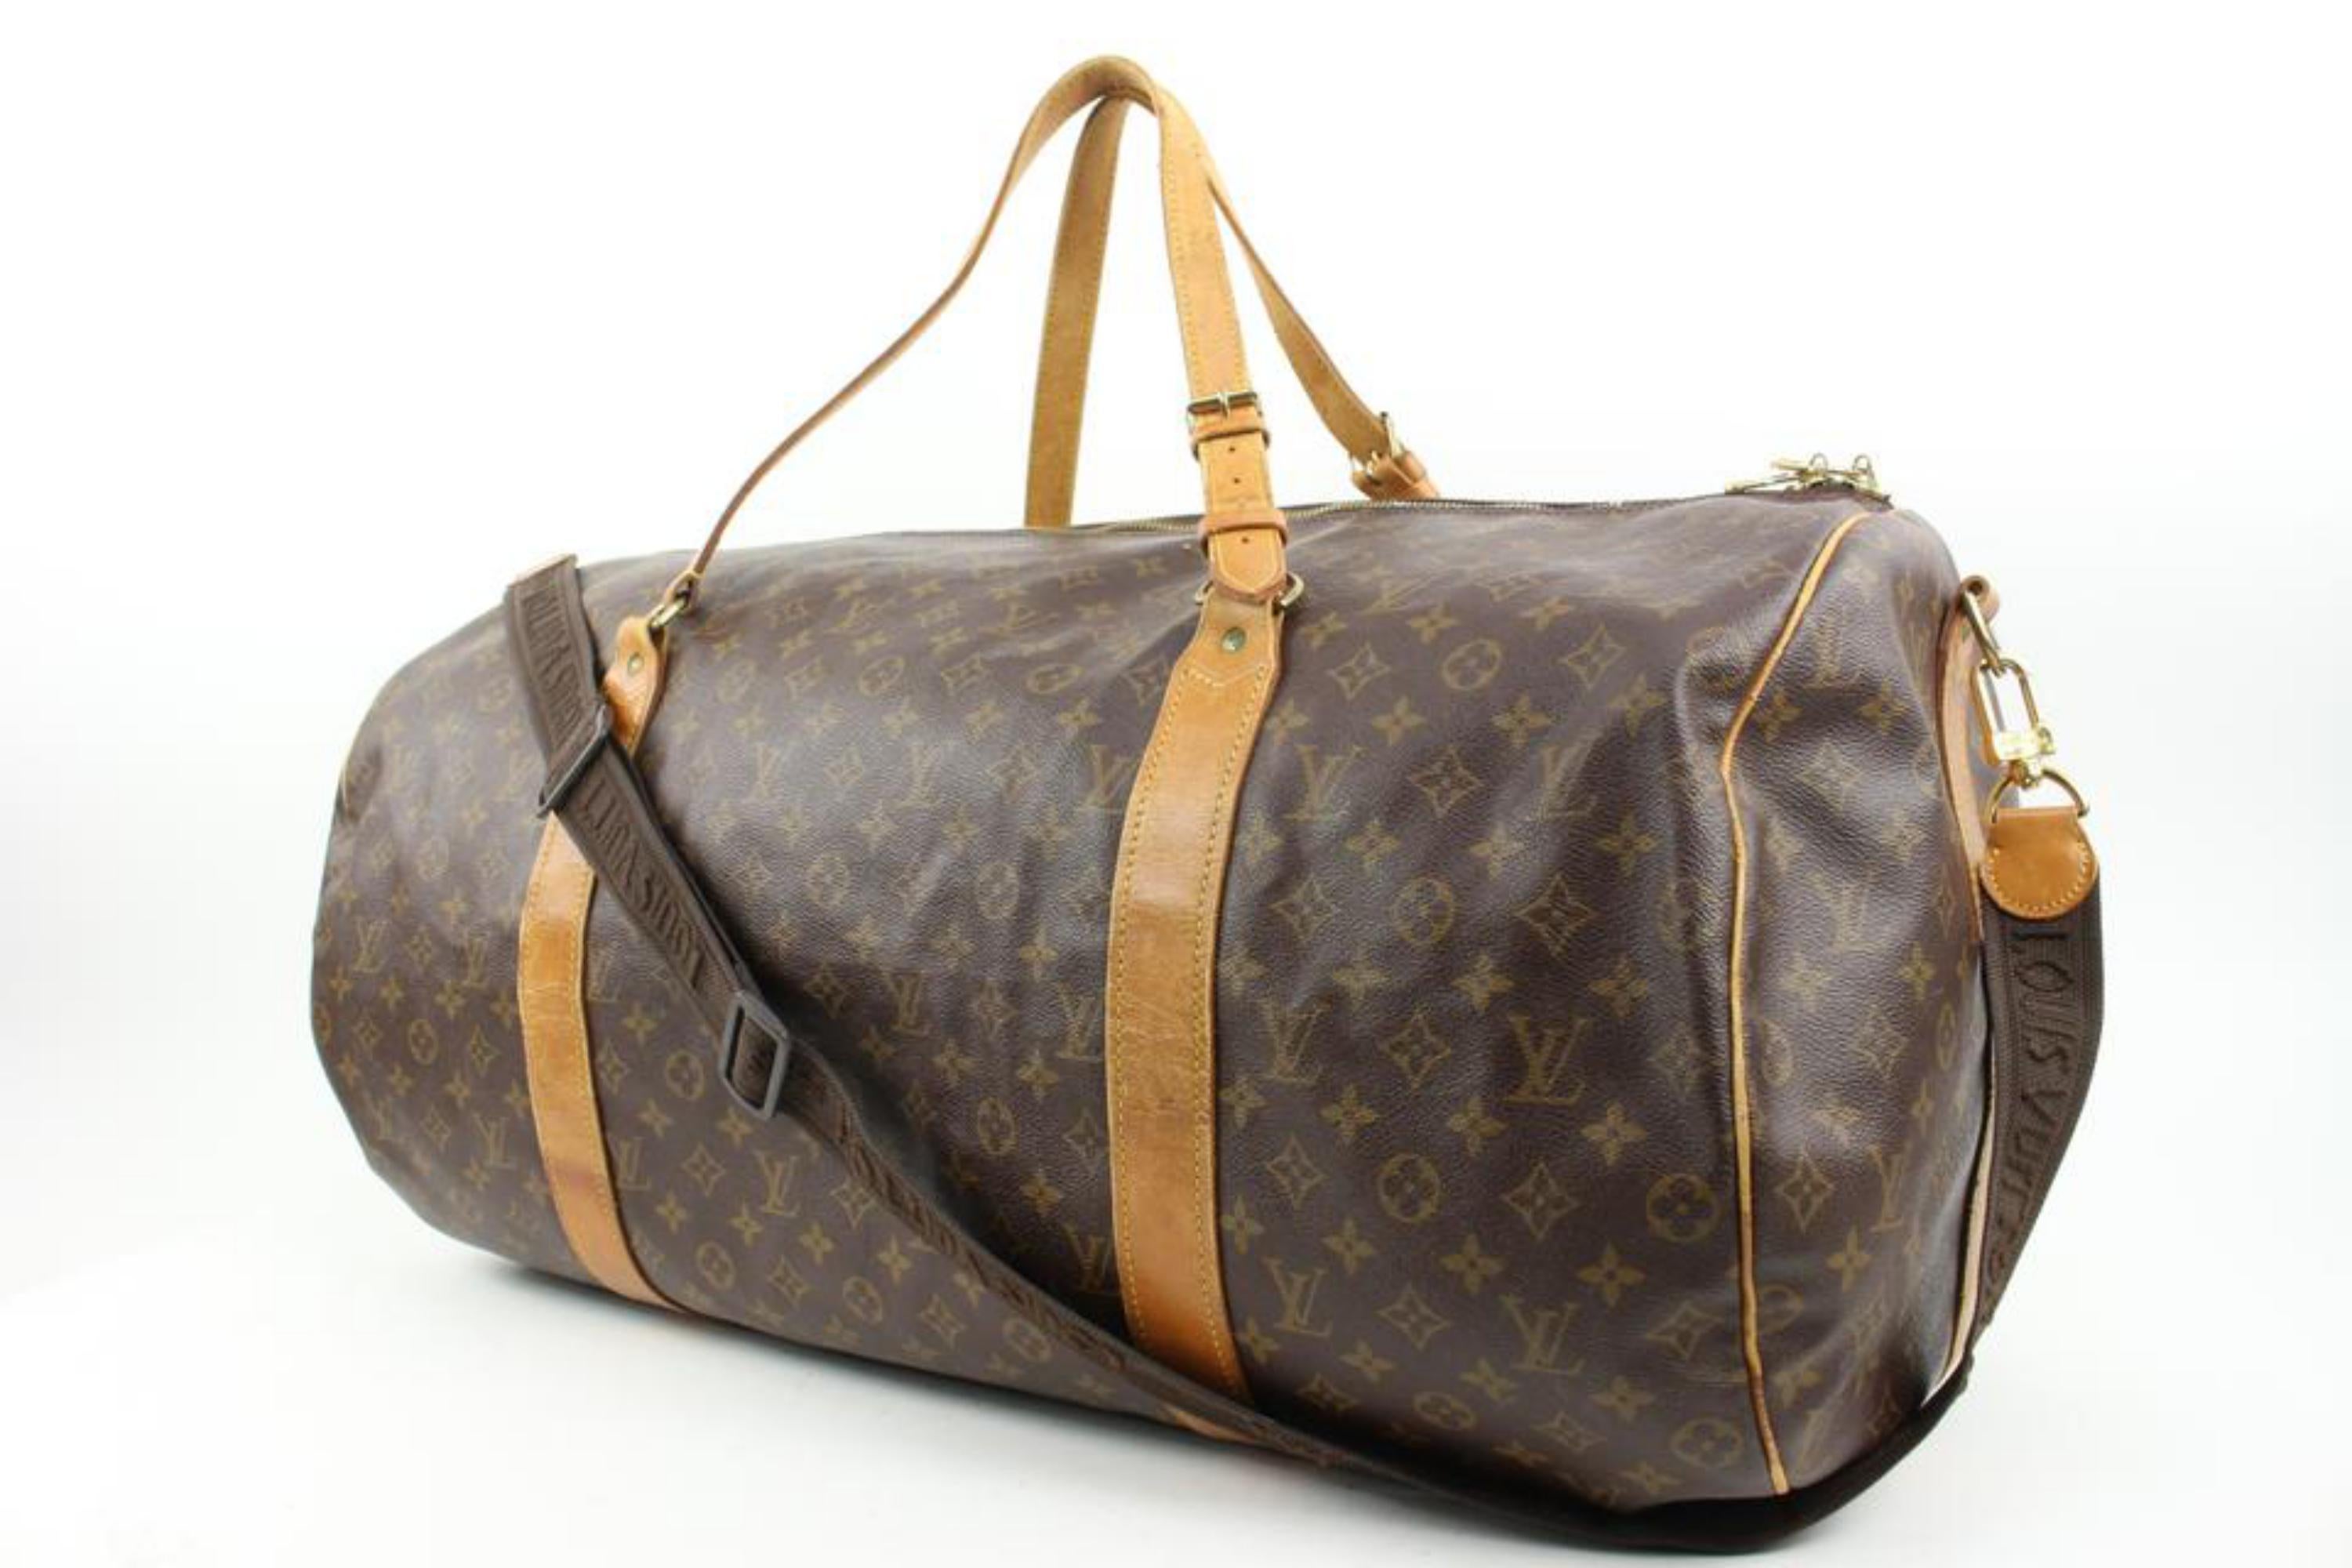 Louis Vuitton XL Monogram Sac Polochon 70 Keepall Bandouliere s214lv89
Date Code/Serial Number: A11903
Made In: France
Measurements: Length:  26.5